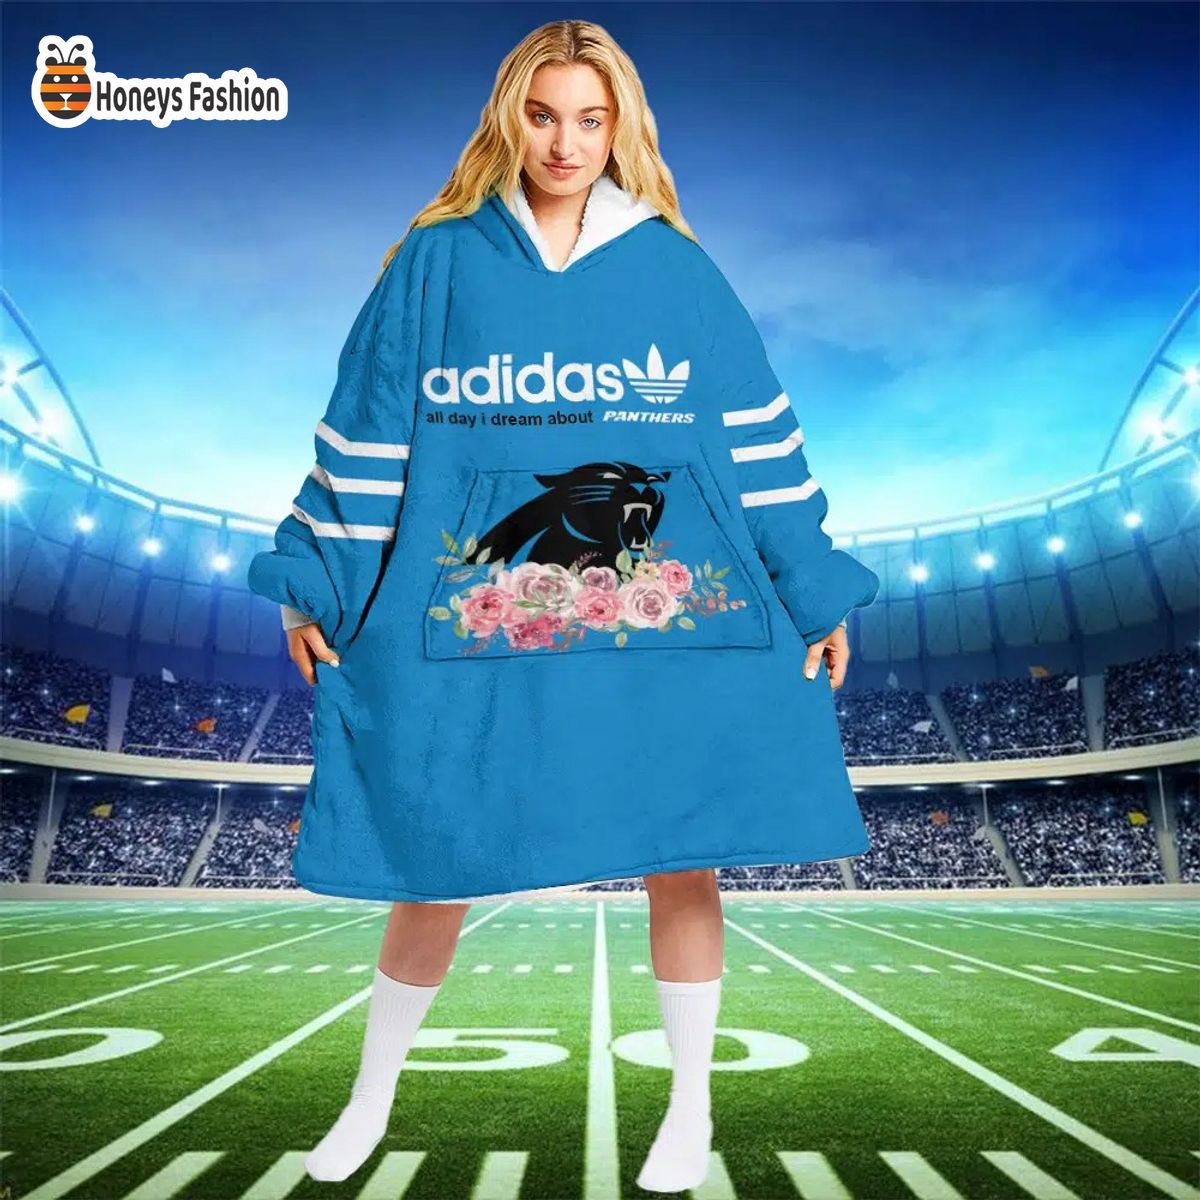 Carolina Panthers NFL Adidas all day i dream about Panthers blanket hoodie